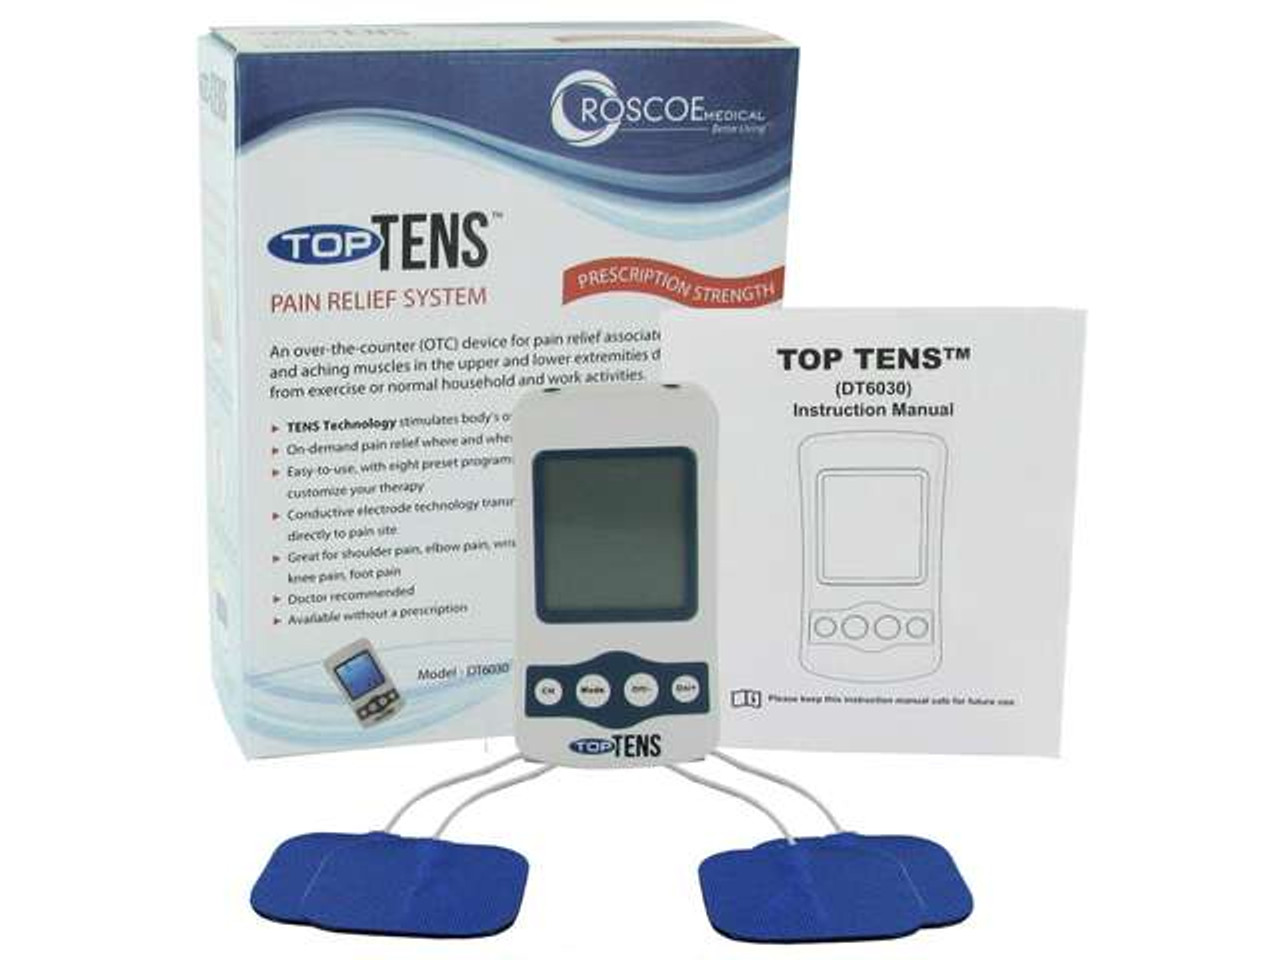 TopTENS Pain Relief System